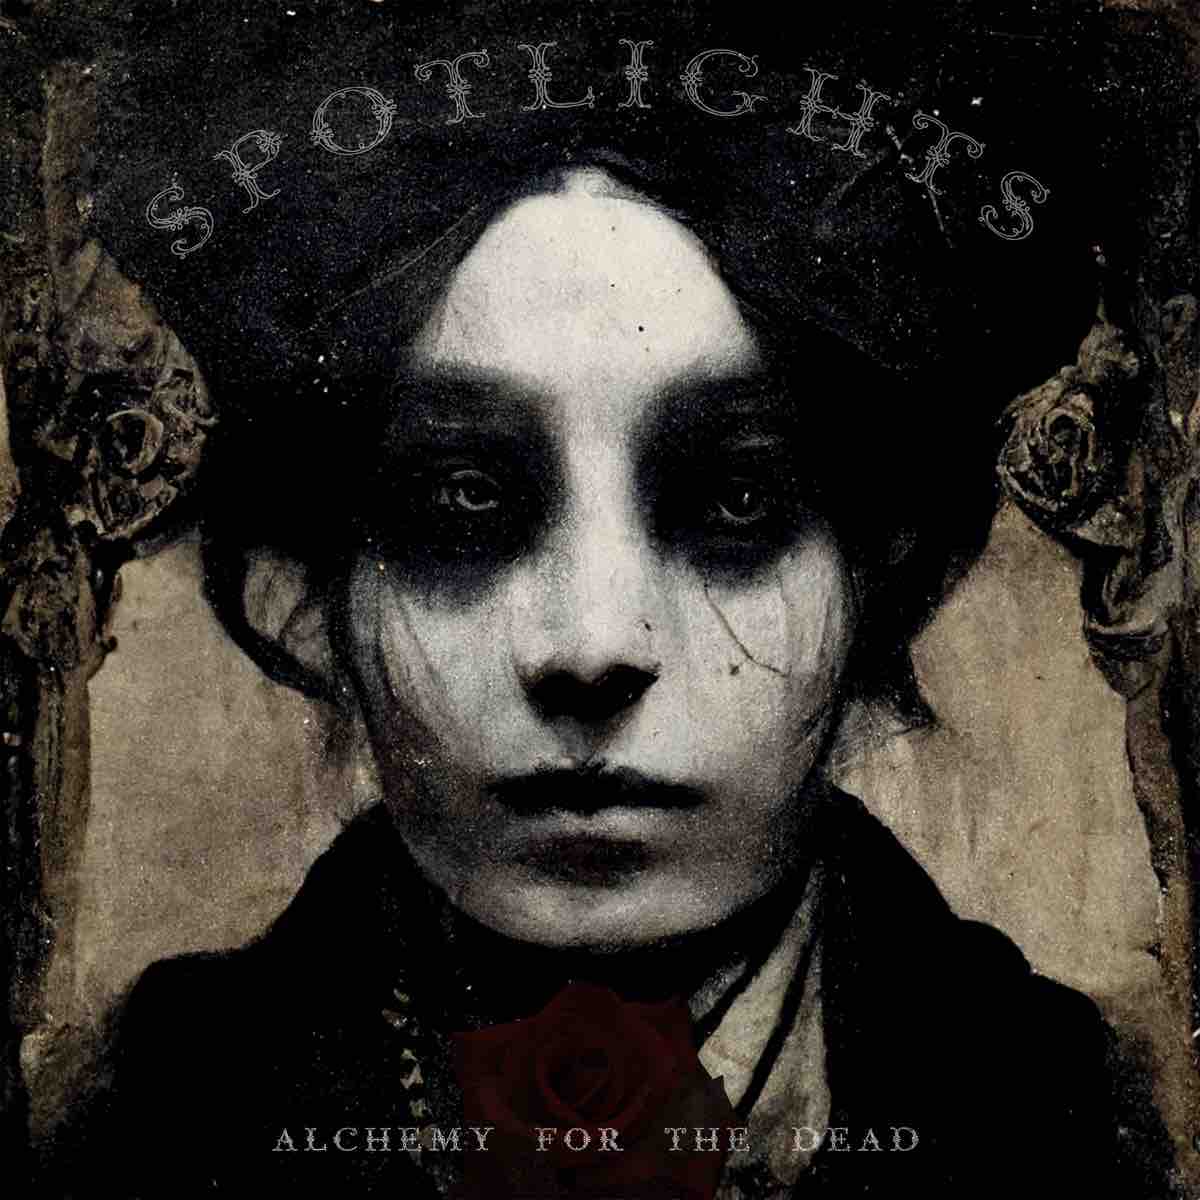 Spotlights - Alchemy For The Dead LP